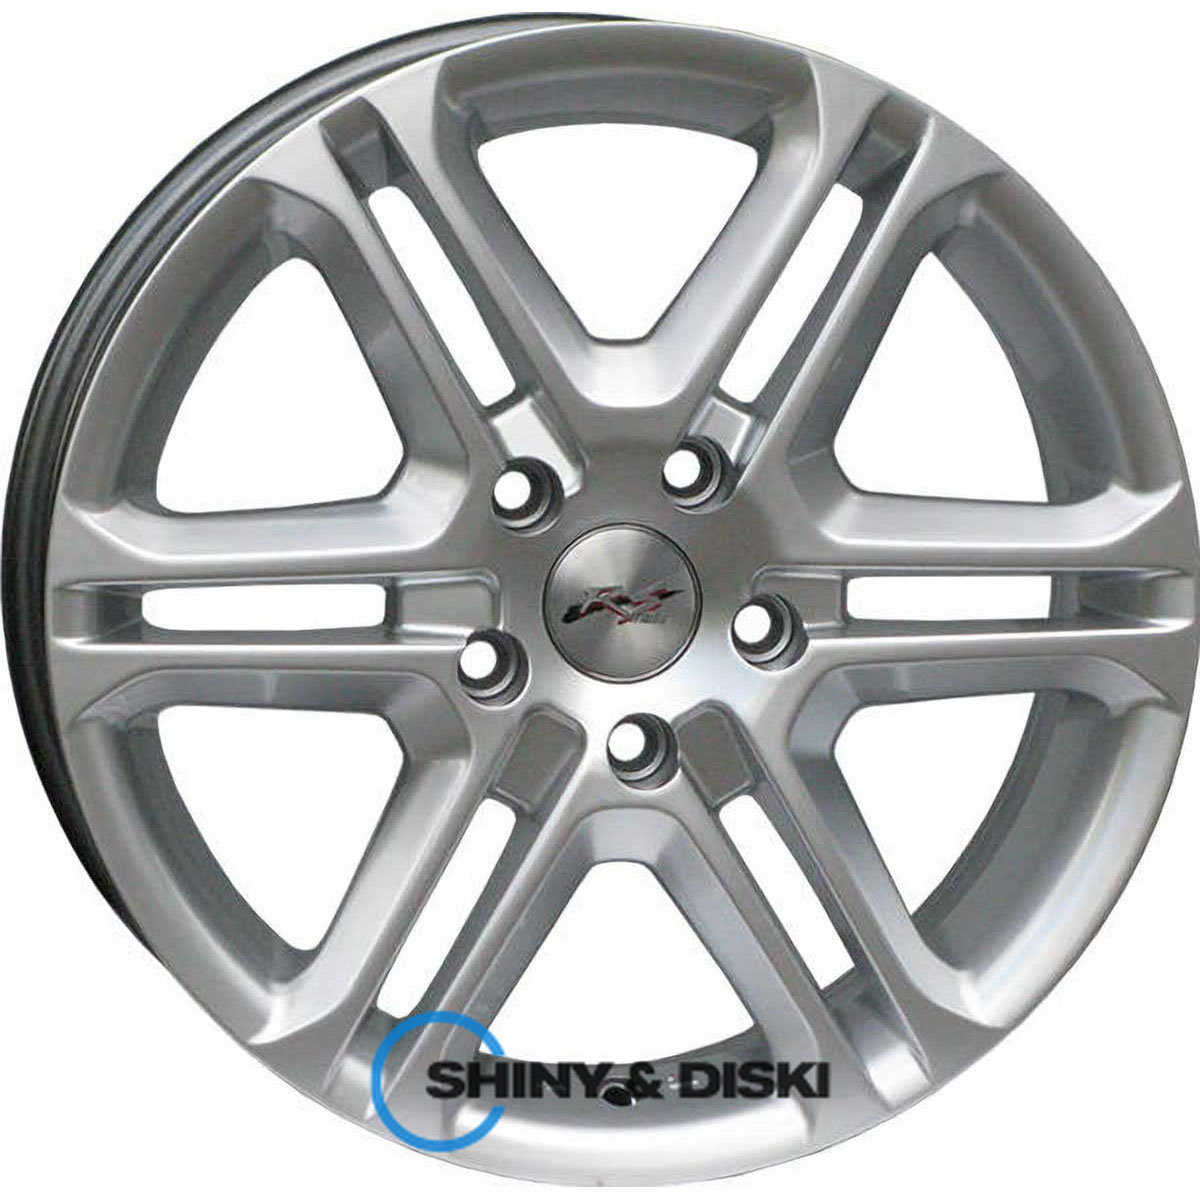 rs tuning 789 hs r16 w6.5 pcd5x112 et45 dia67.1